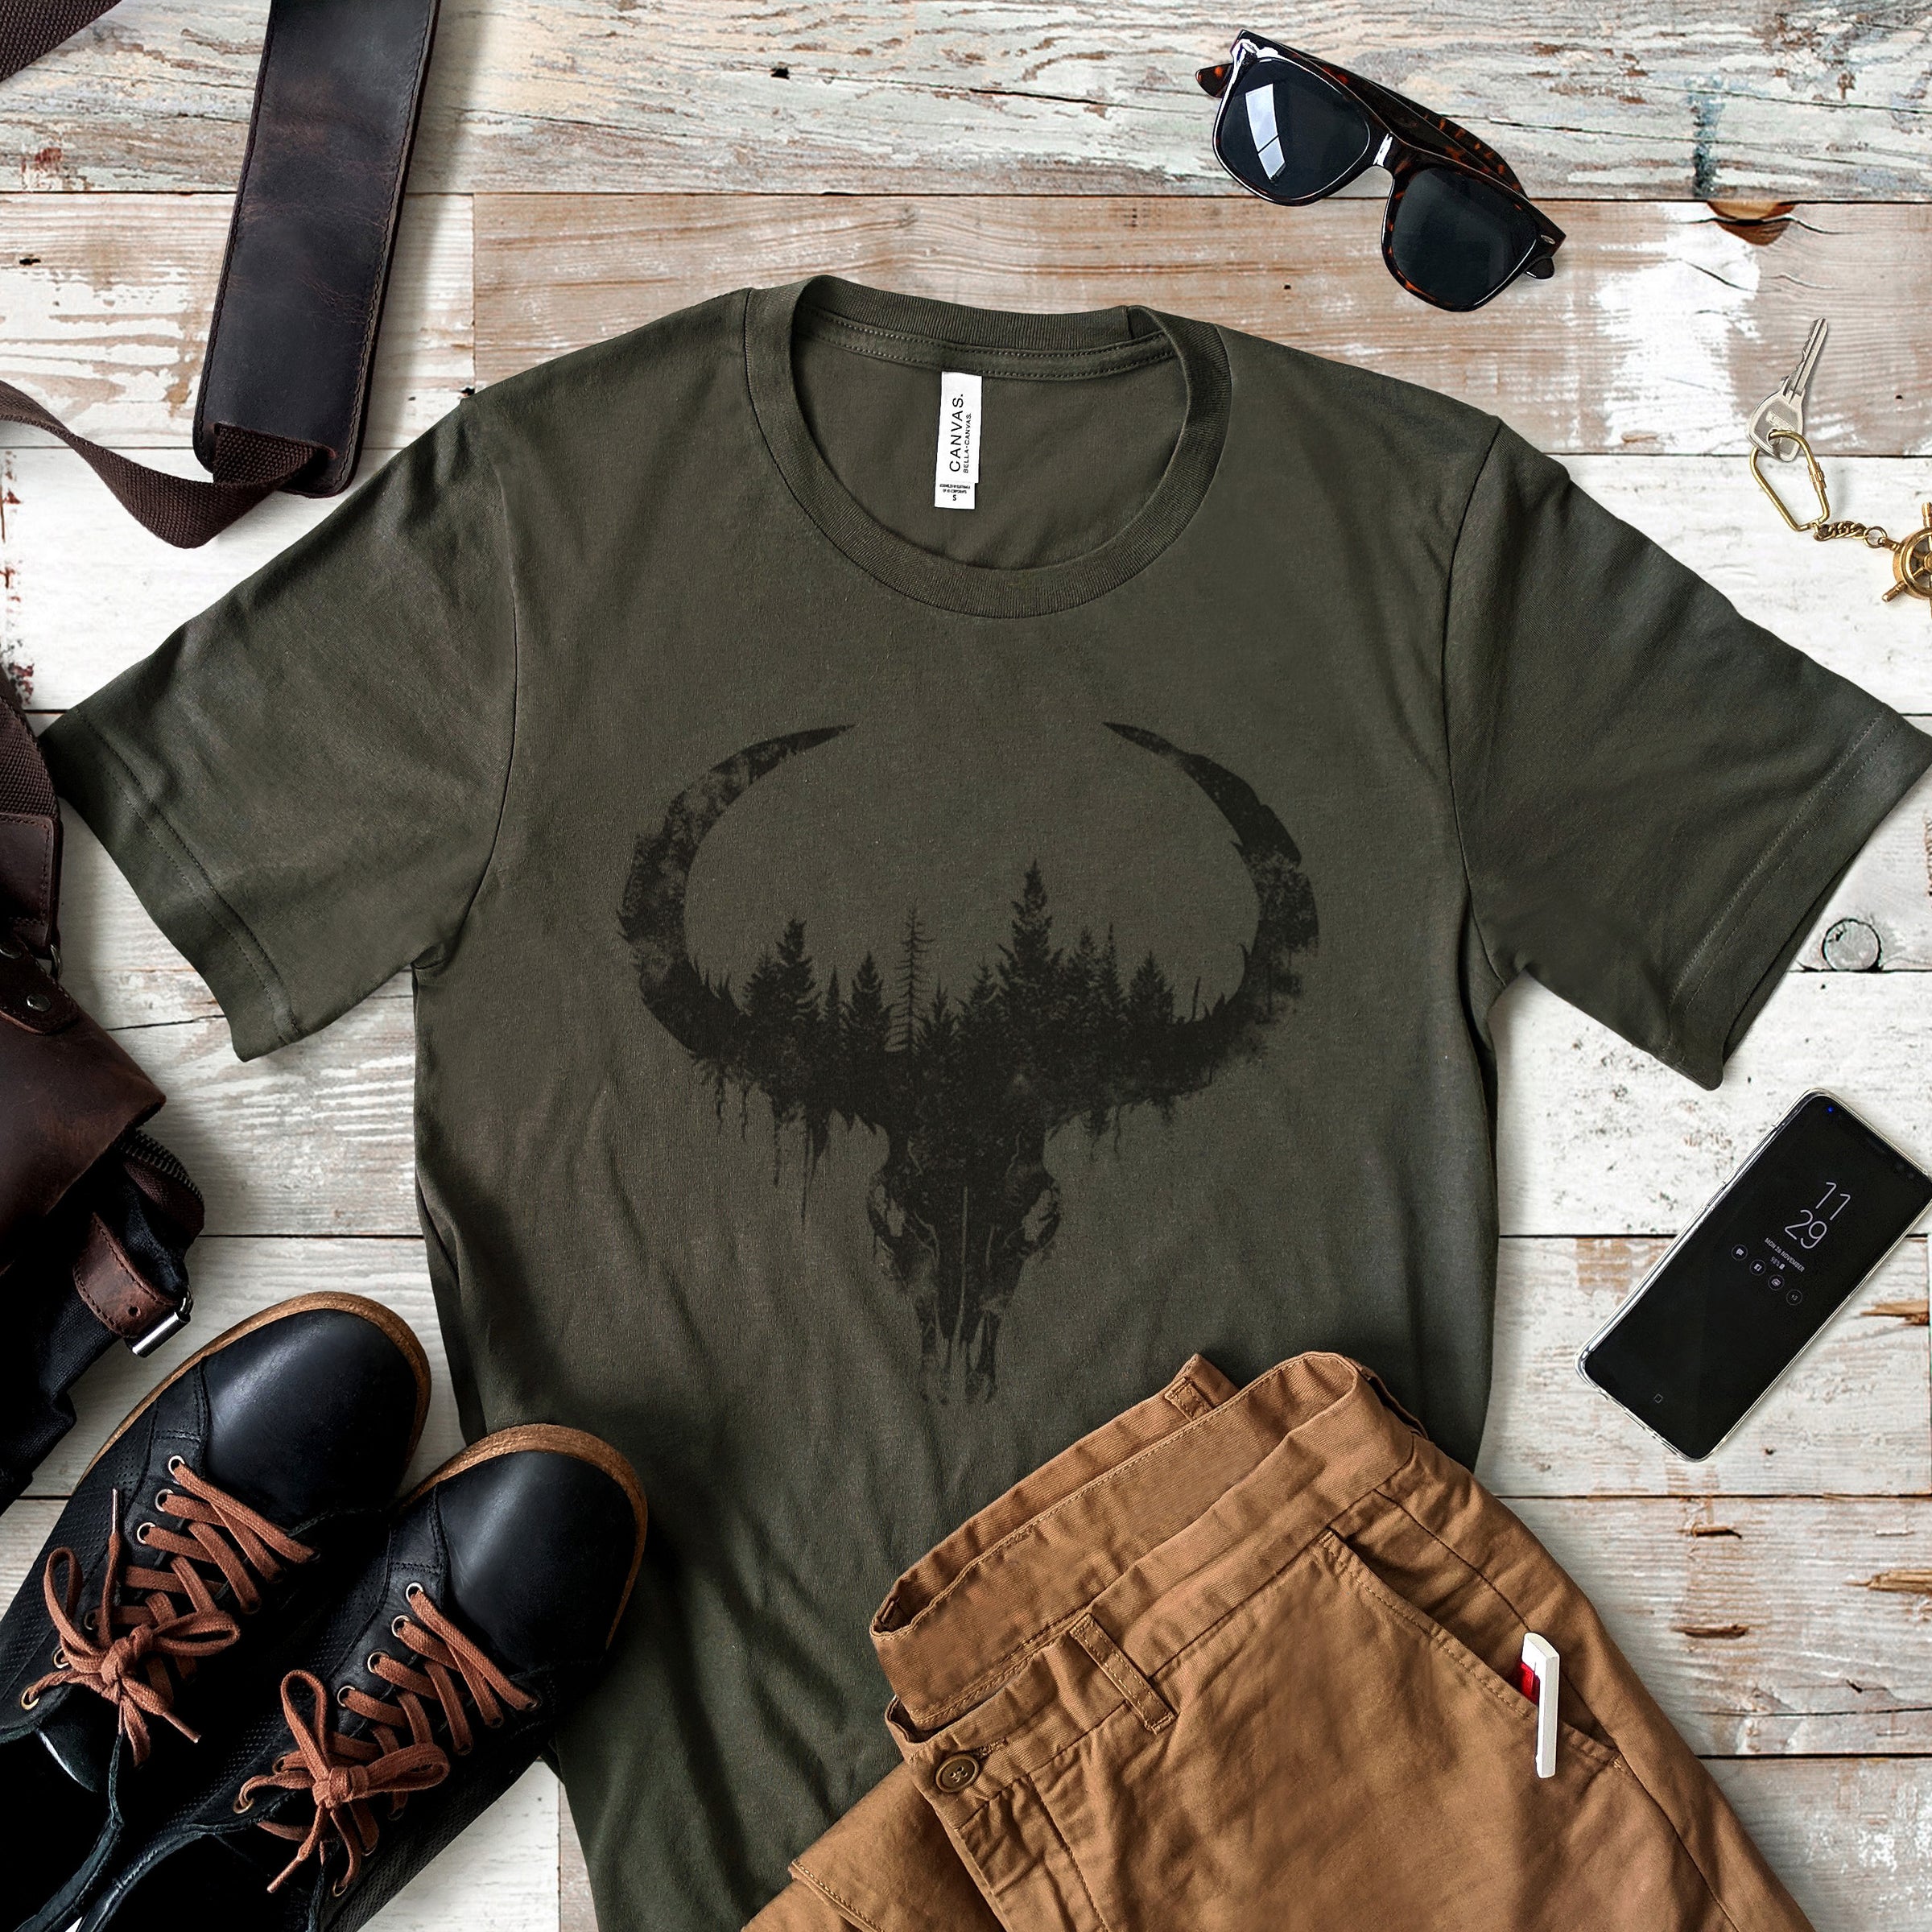 a t - shirt with an image of a bull on it